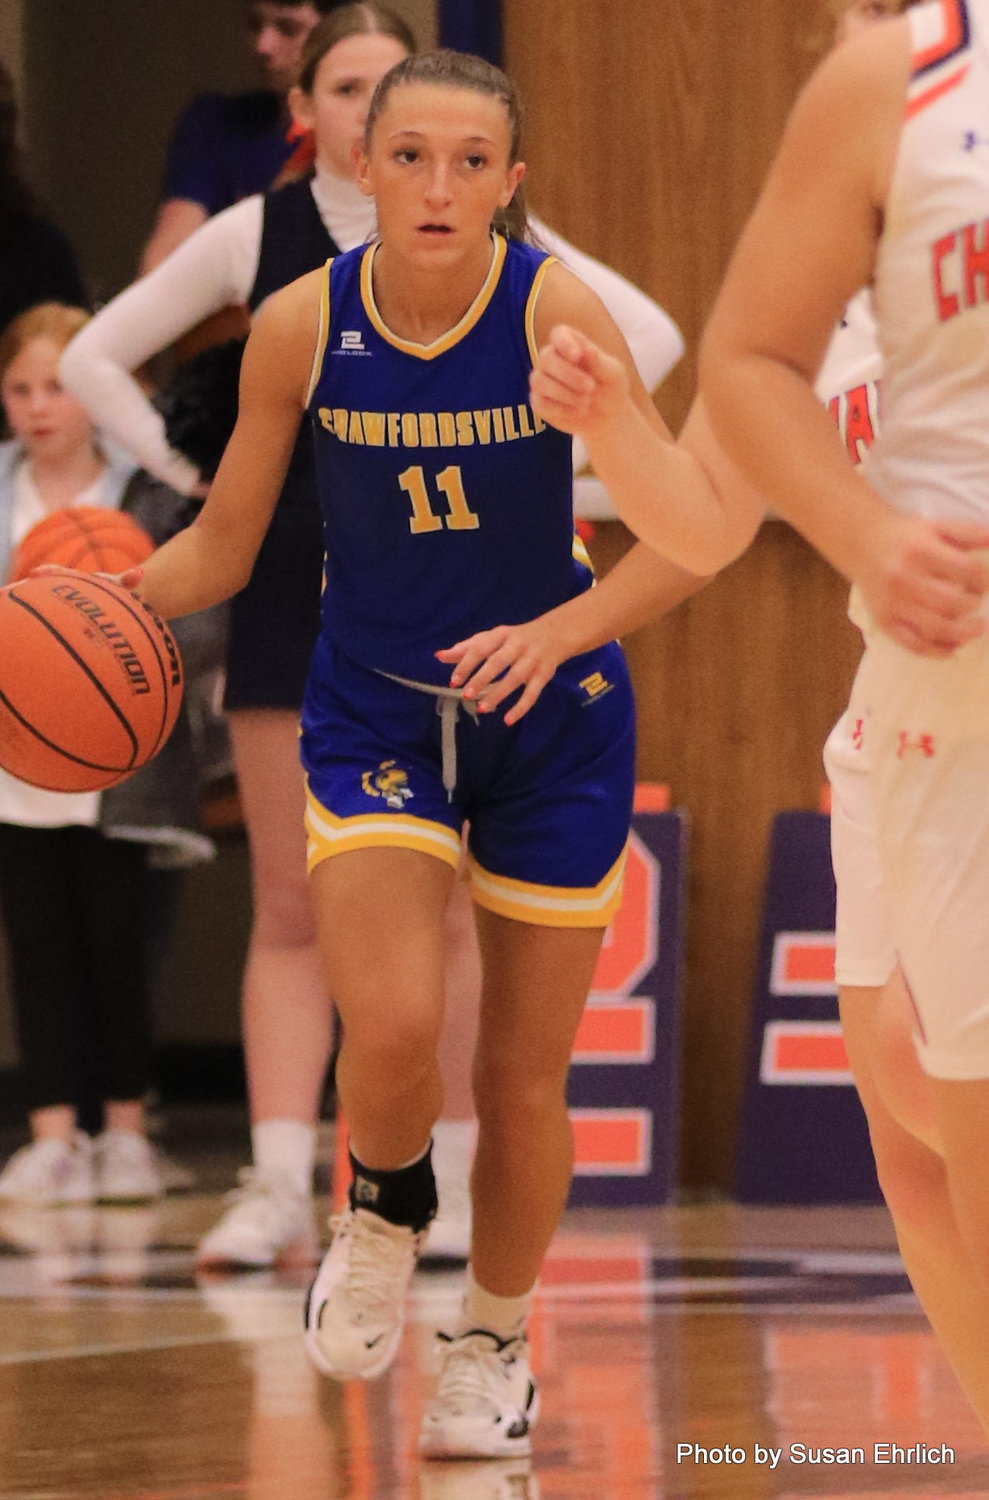 Crawfordsville senior Elyse Widmer had a career high 17 points to help lead the Athenians to a 52-45 win over county rival North Montgomery on Friday.